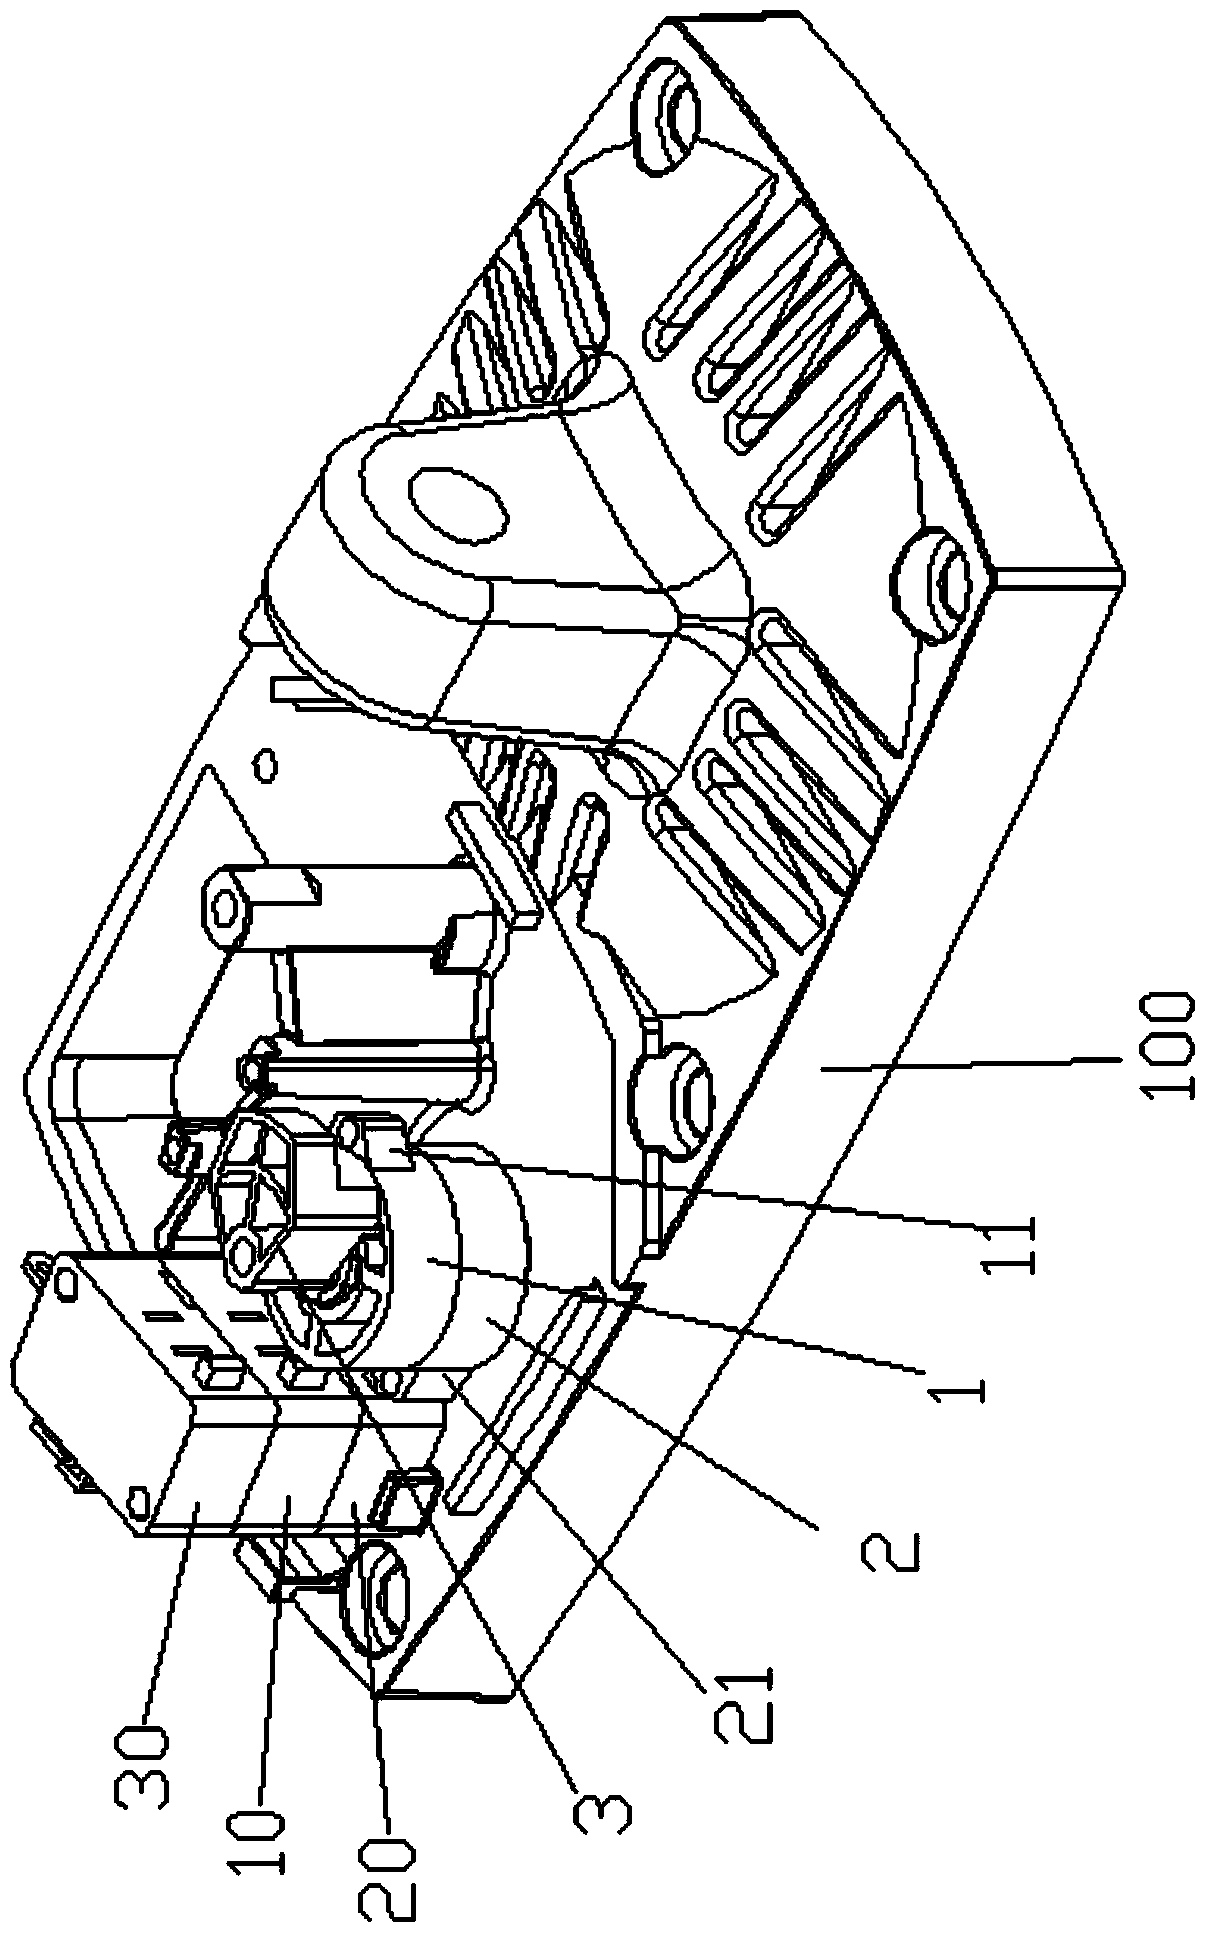 Brake with front outage device